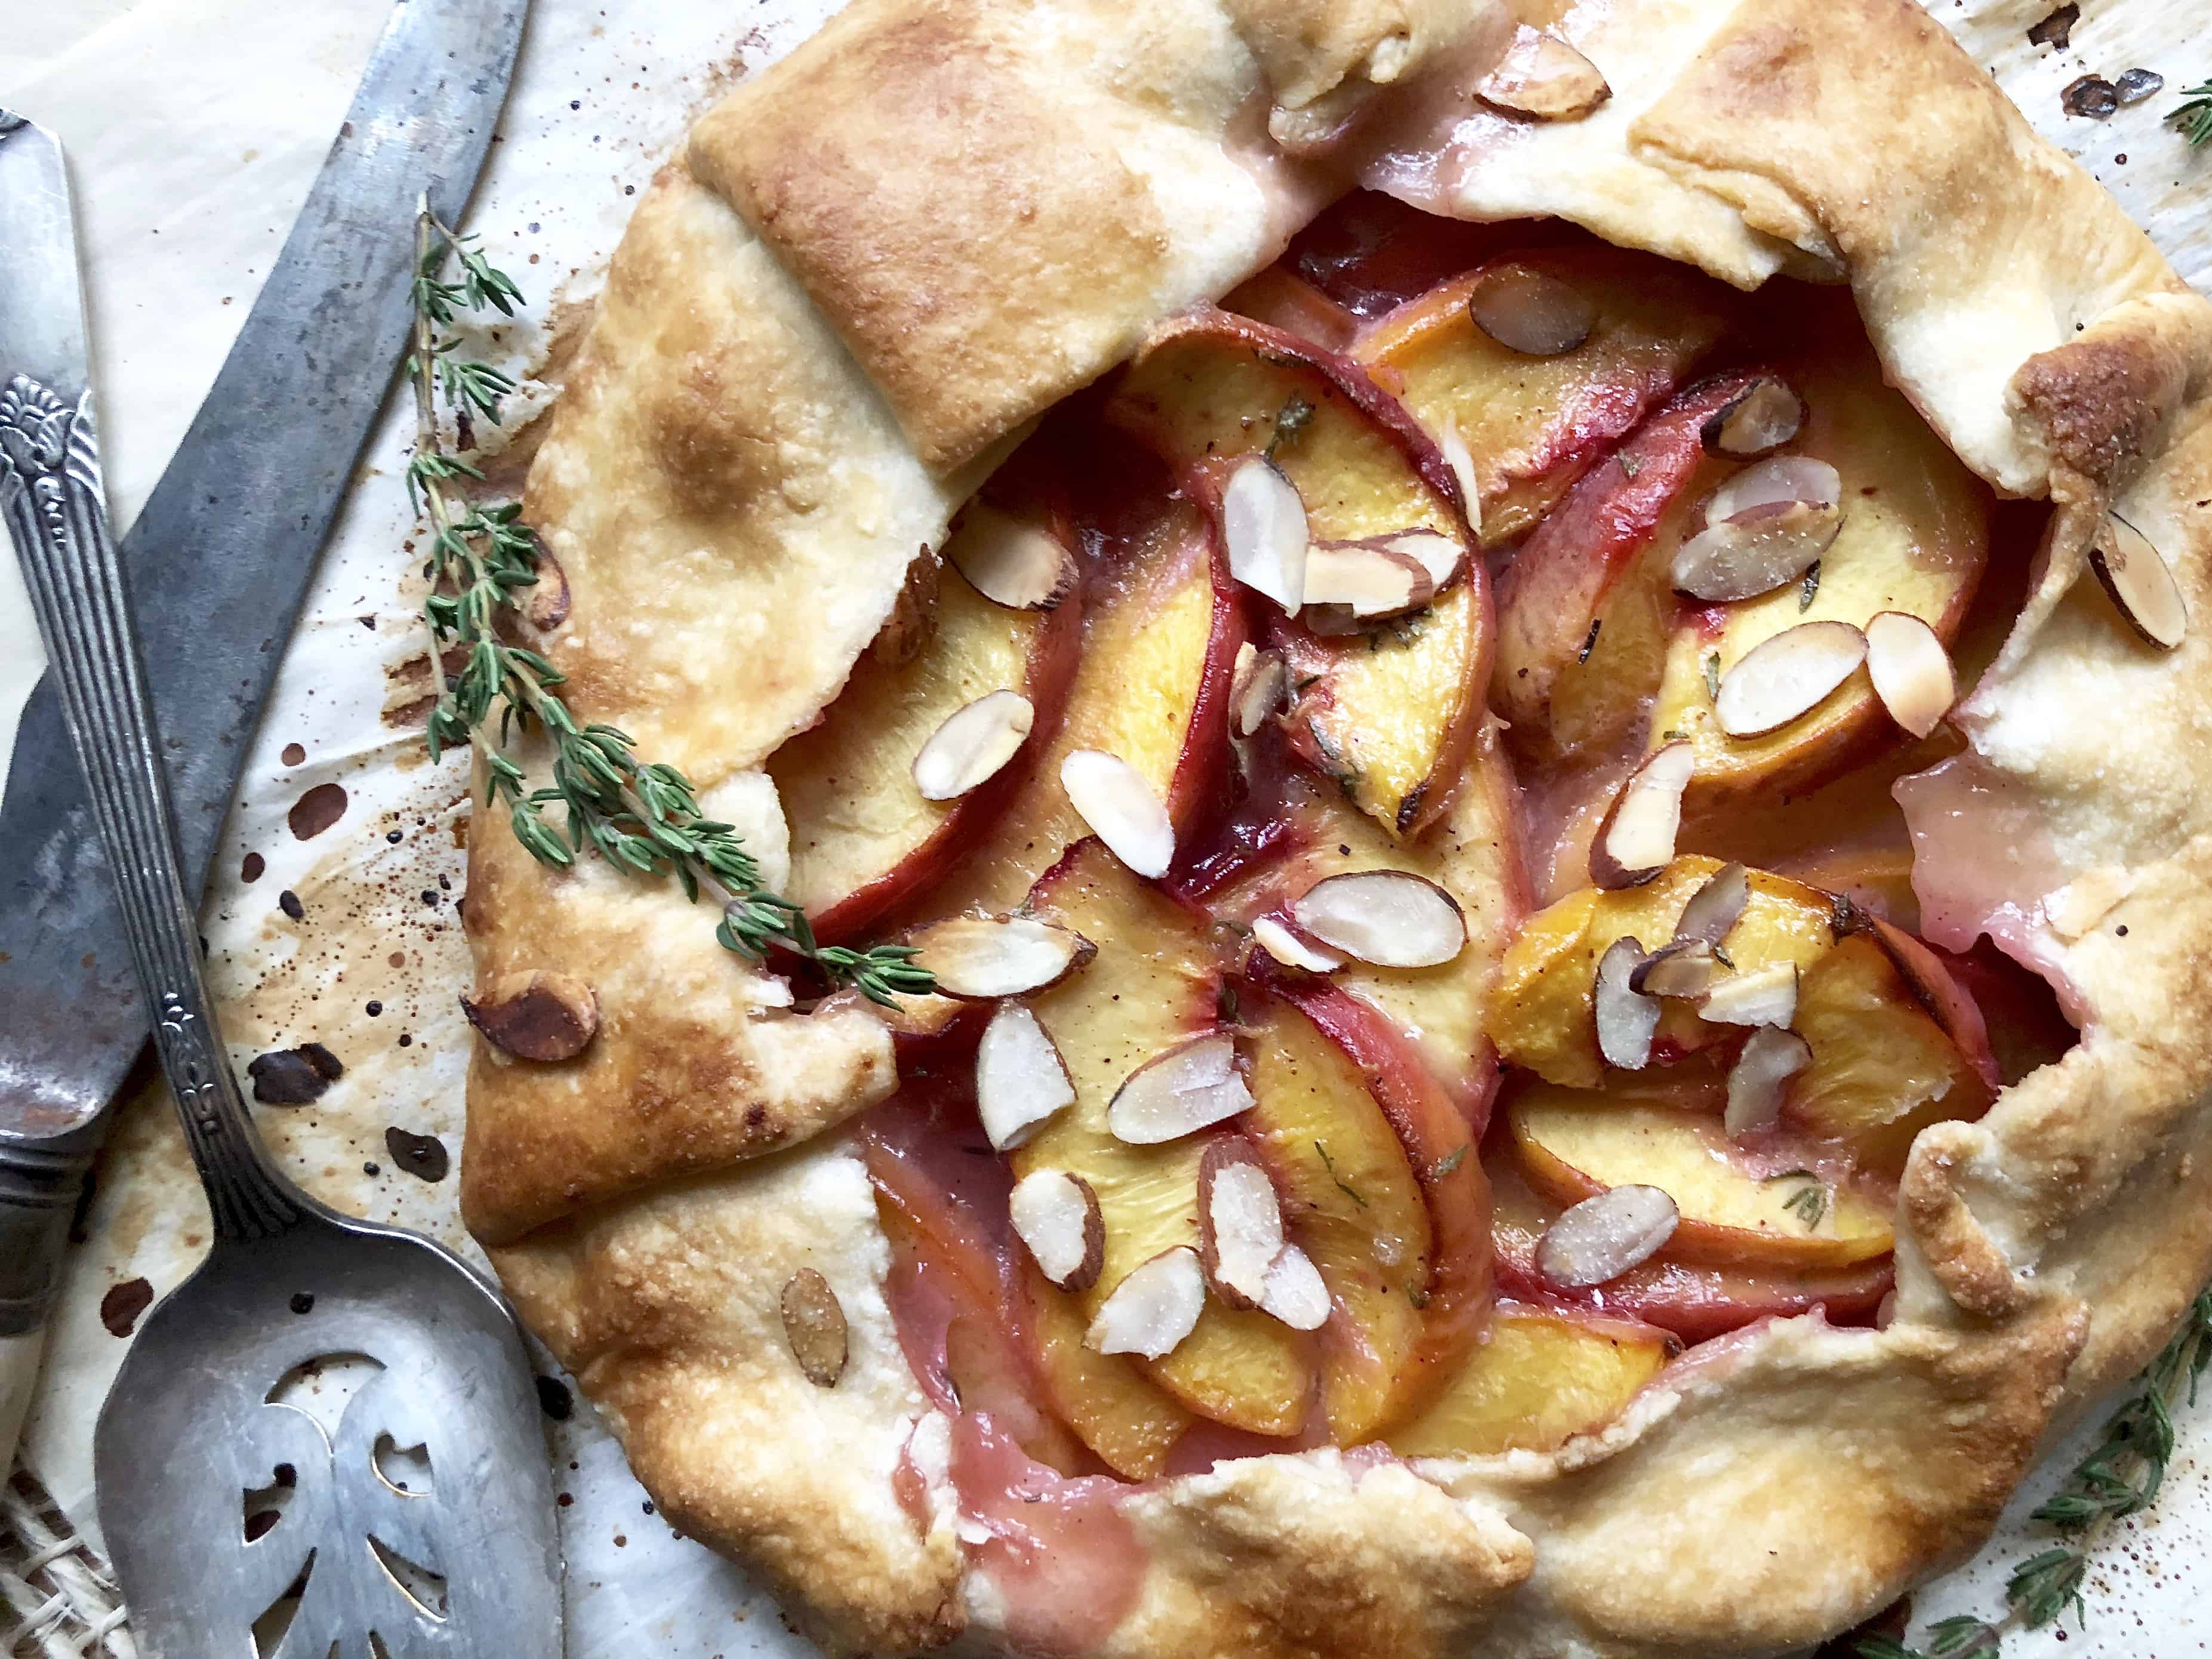 rustic thyme-infused peach tart - a hint of rosemary